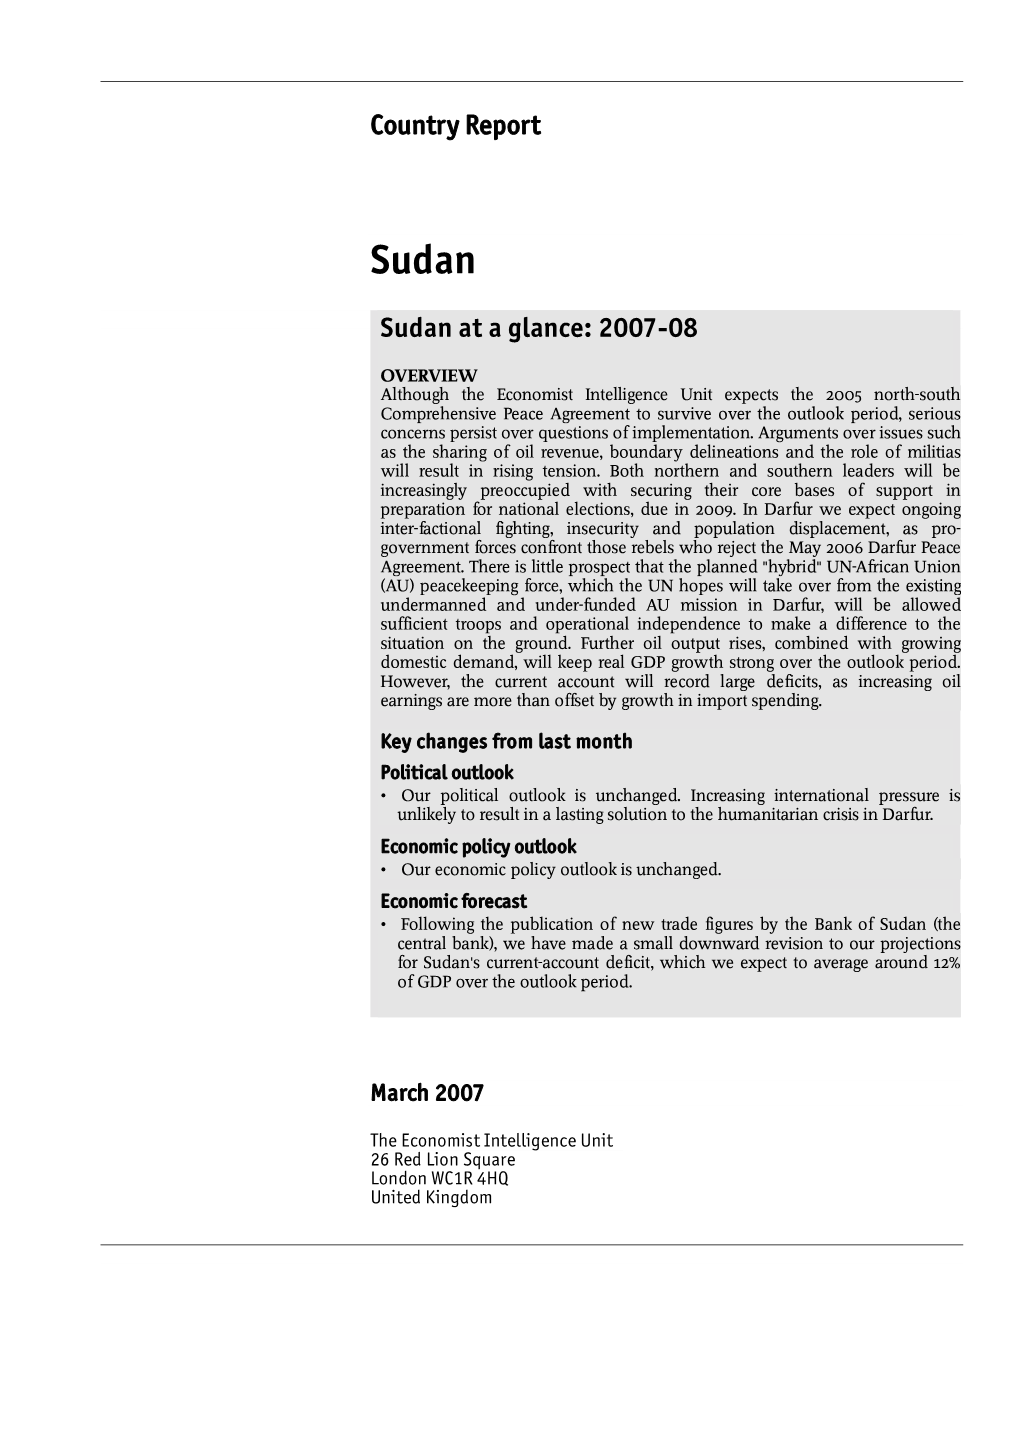 Country Report Sudan at a Glance: 2007-08